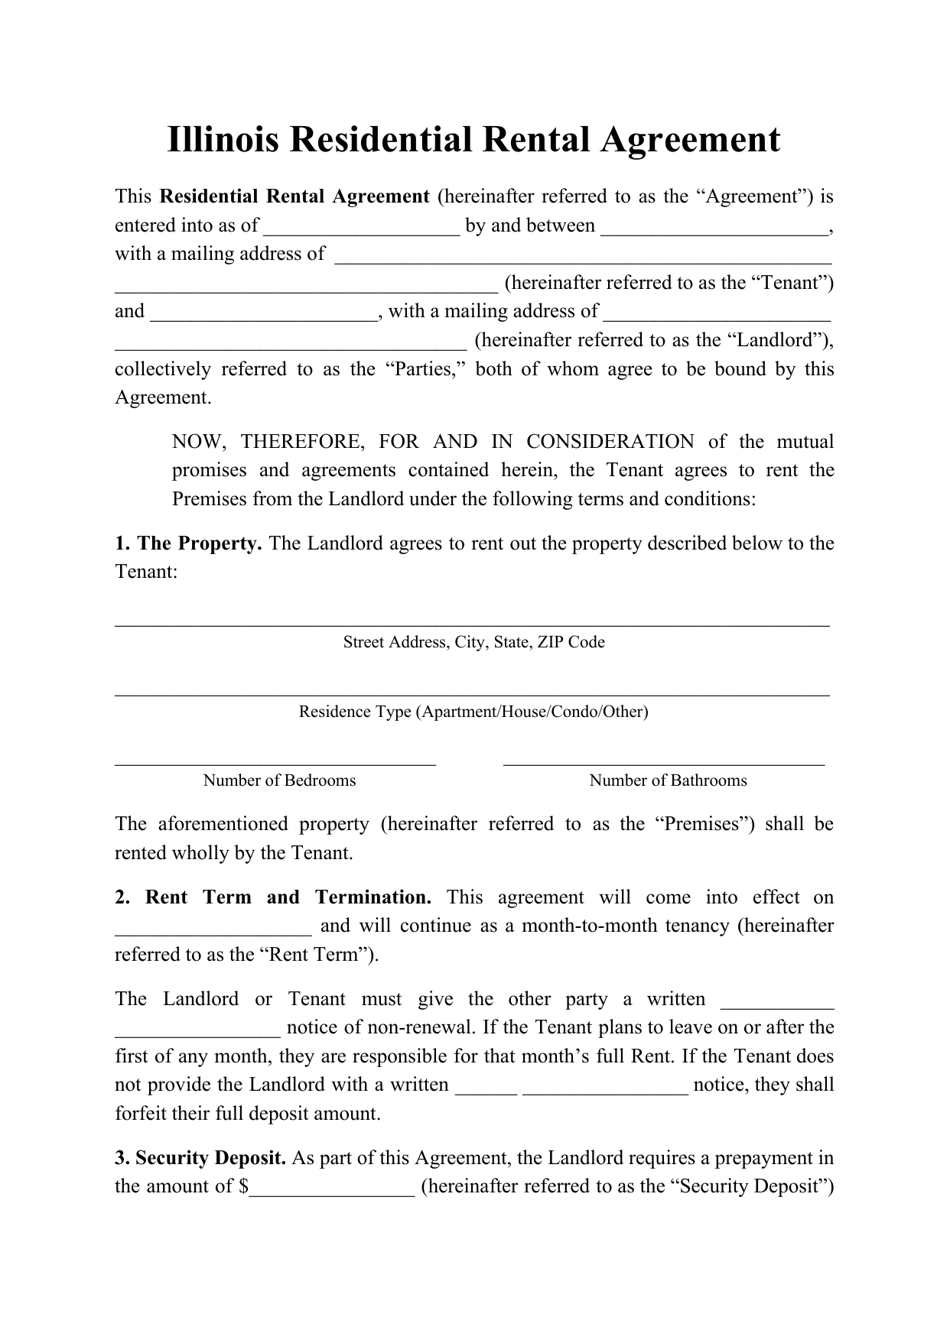 Residential Rental Agreement Template - Illinois, Page 1